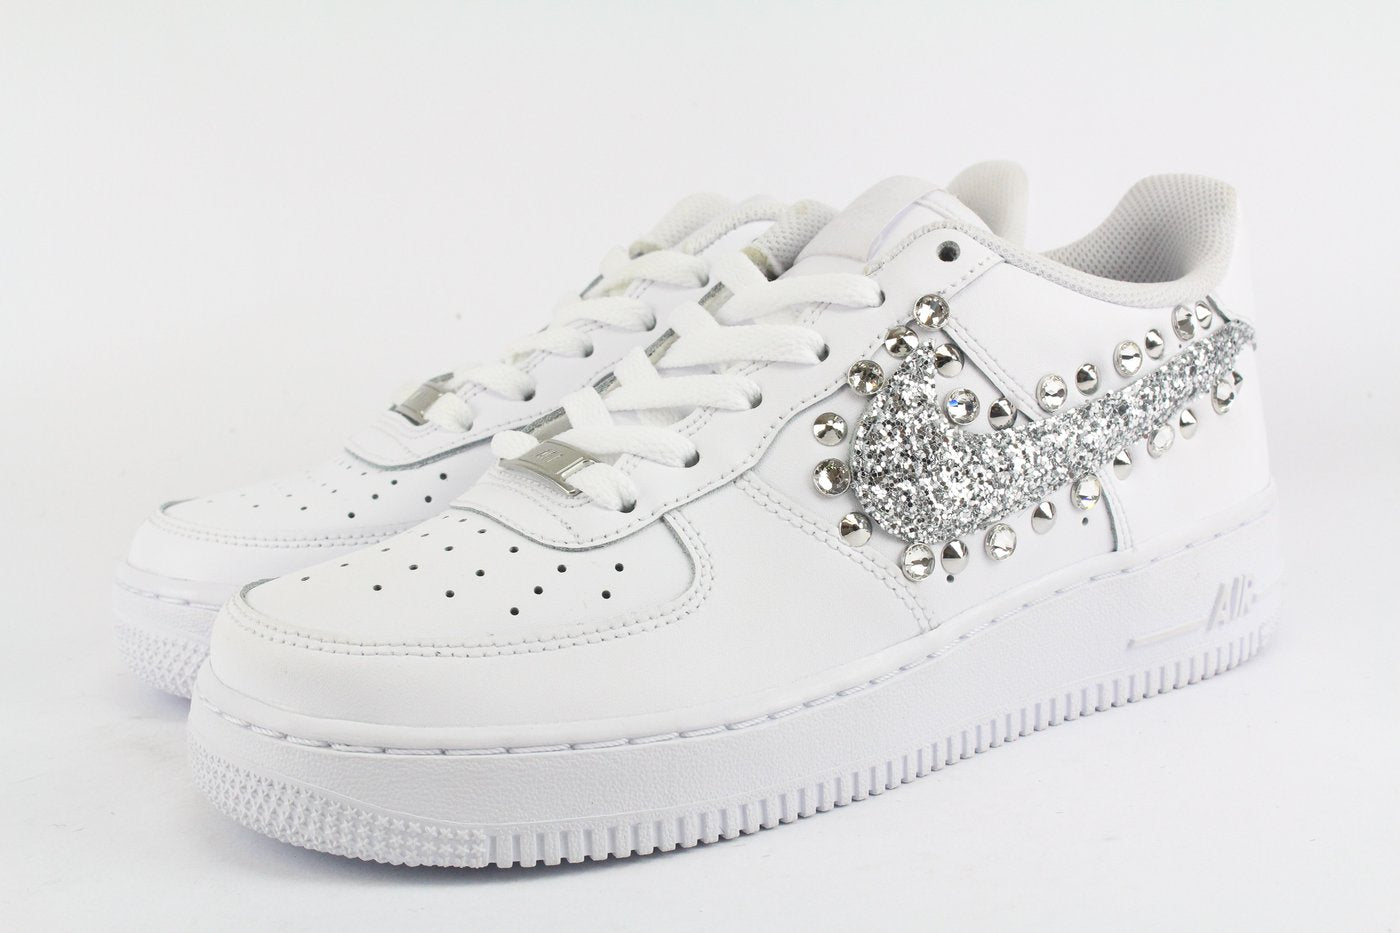 NIKE AIR FORCE GLITTER ARGENTO BORCHIE STRASS